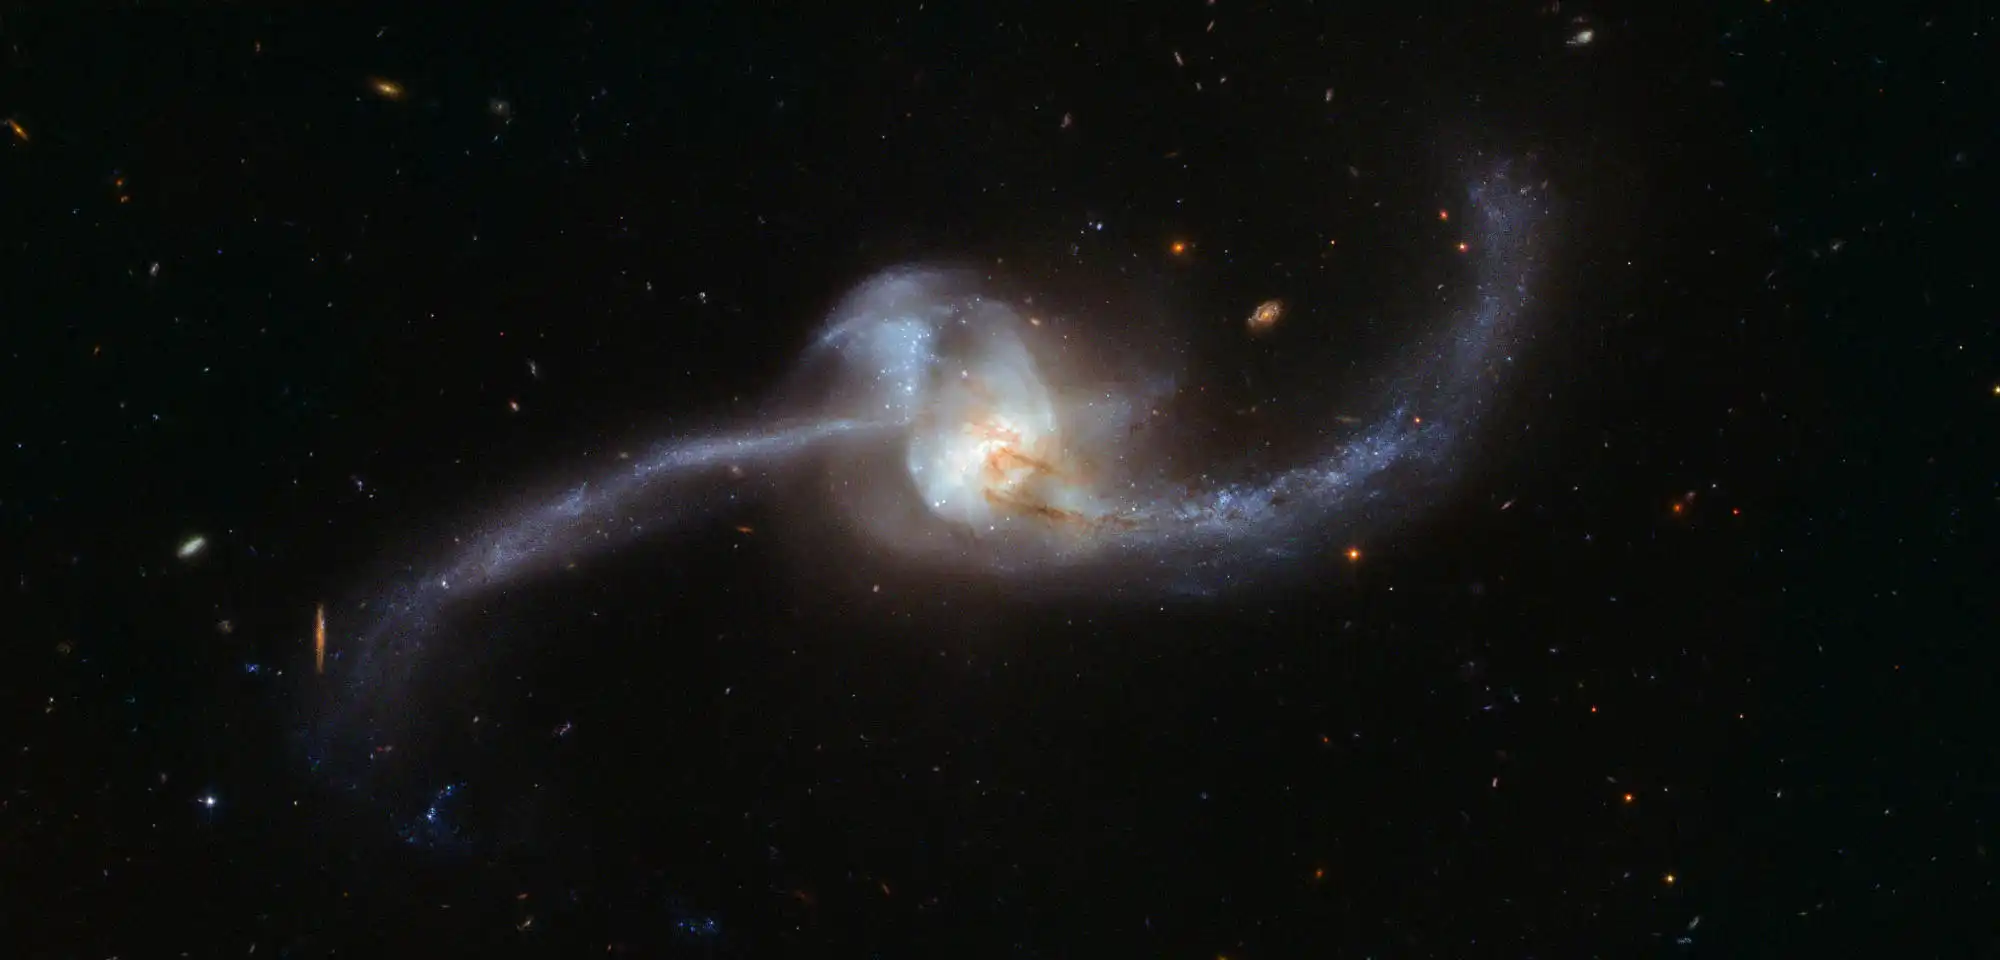 These Photos From the Hubble Space Telescope Show Two Galaxies ...